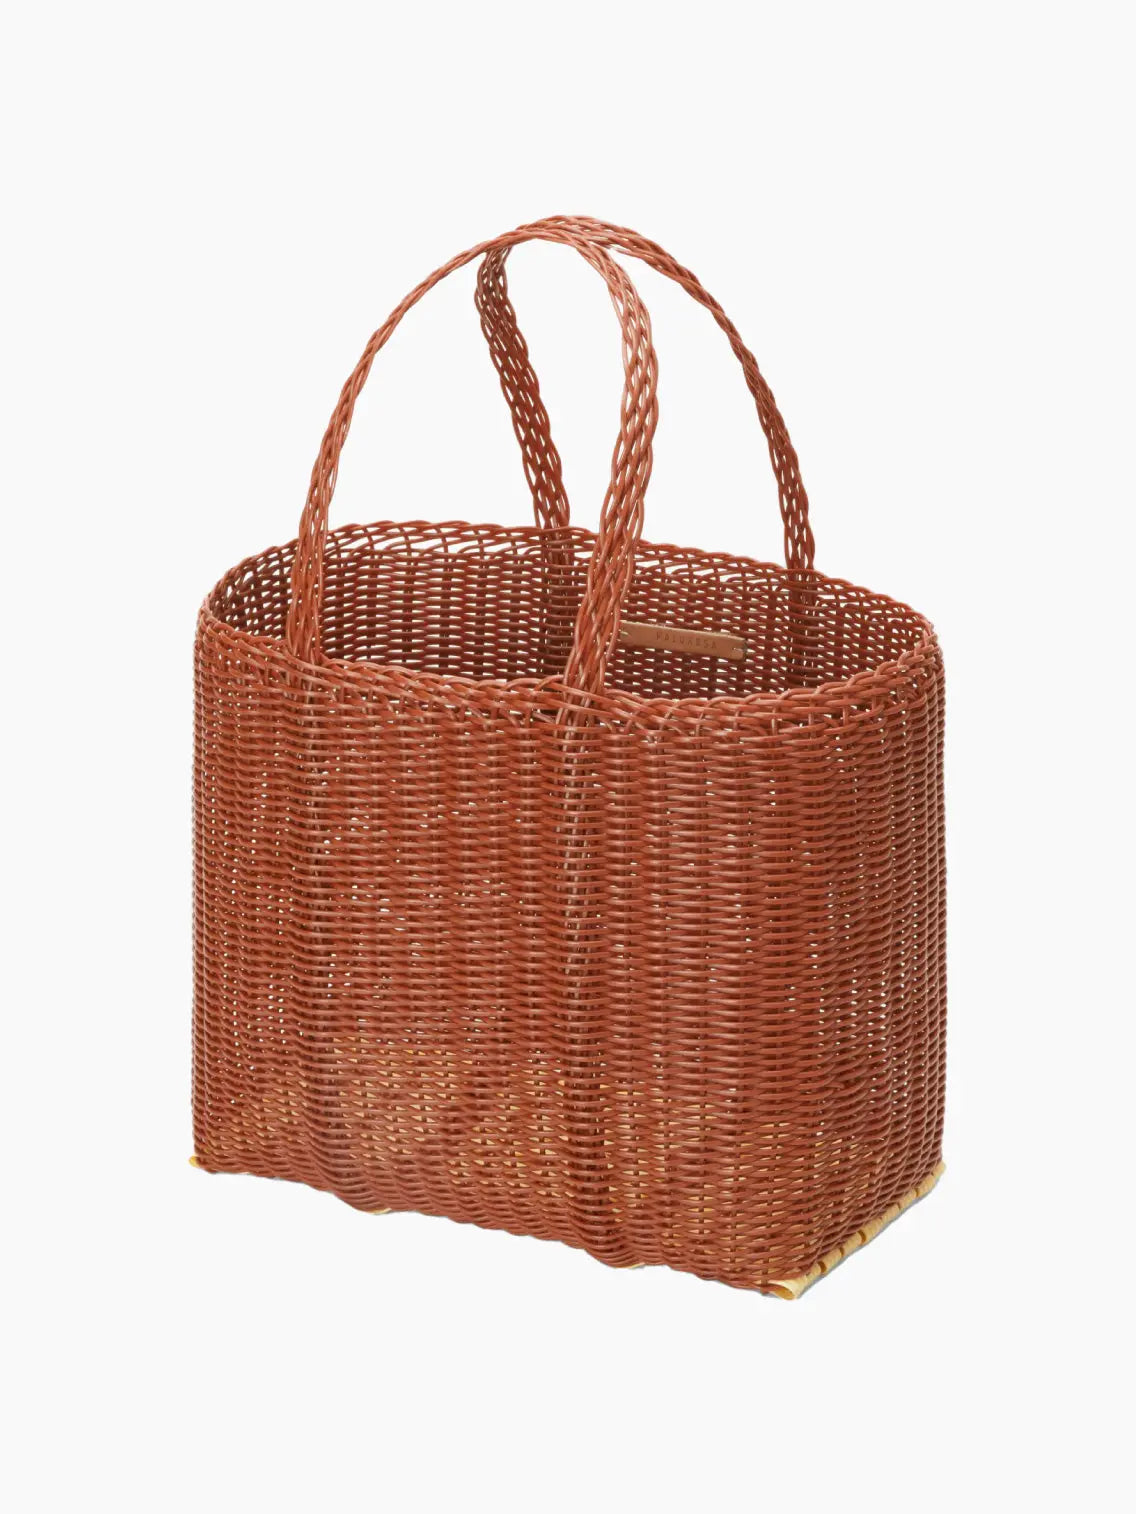 A rectangular, brown wicker handbag with sturdy double handles. The woven texture and earthy tone give it a rustic, natural appearance. Perfect for a day out in Barcelona, the Flat Small Clay Bag by Palorosa has a spacious interior, stylishly designed for practicality and fashion. Available now at Bassalstore.